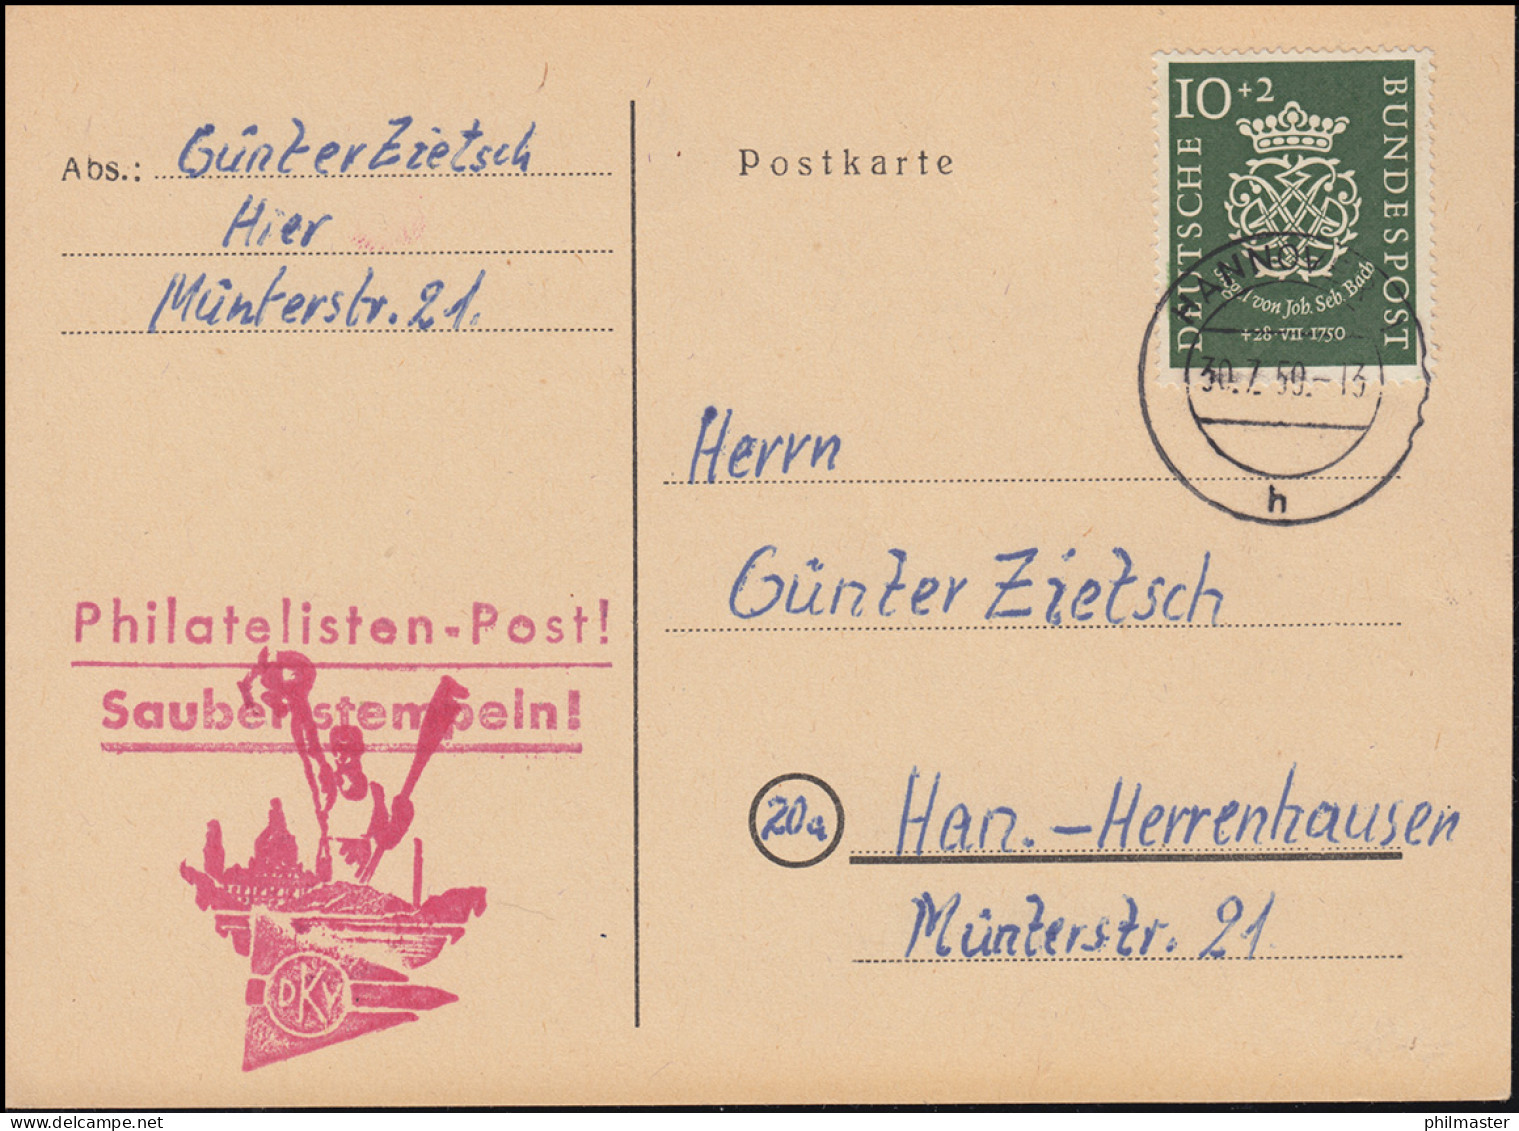 121 Bach 10 Pf Auf Orts-Postkarte HANNOVER 30.7.1950 - Lettres & Documents